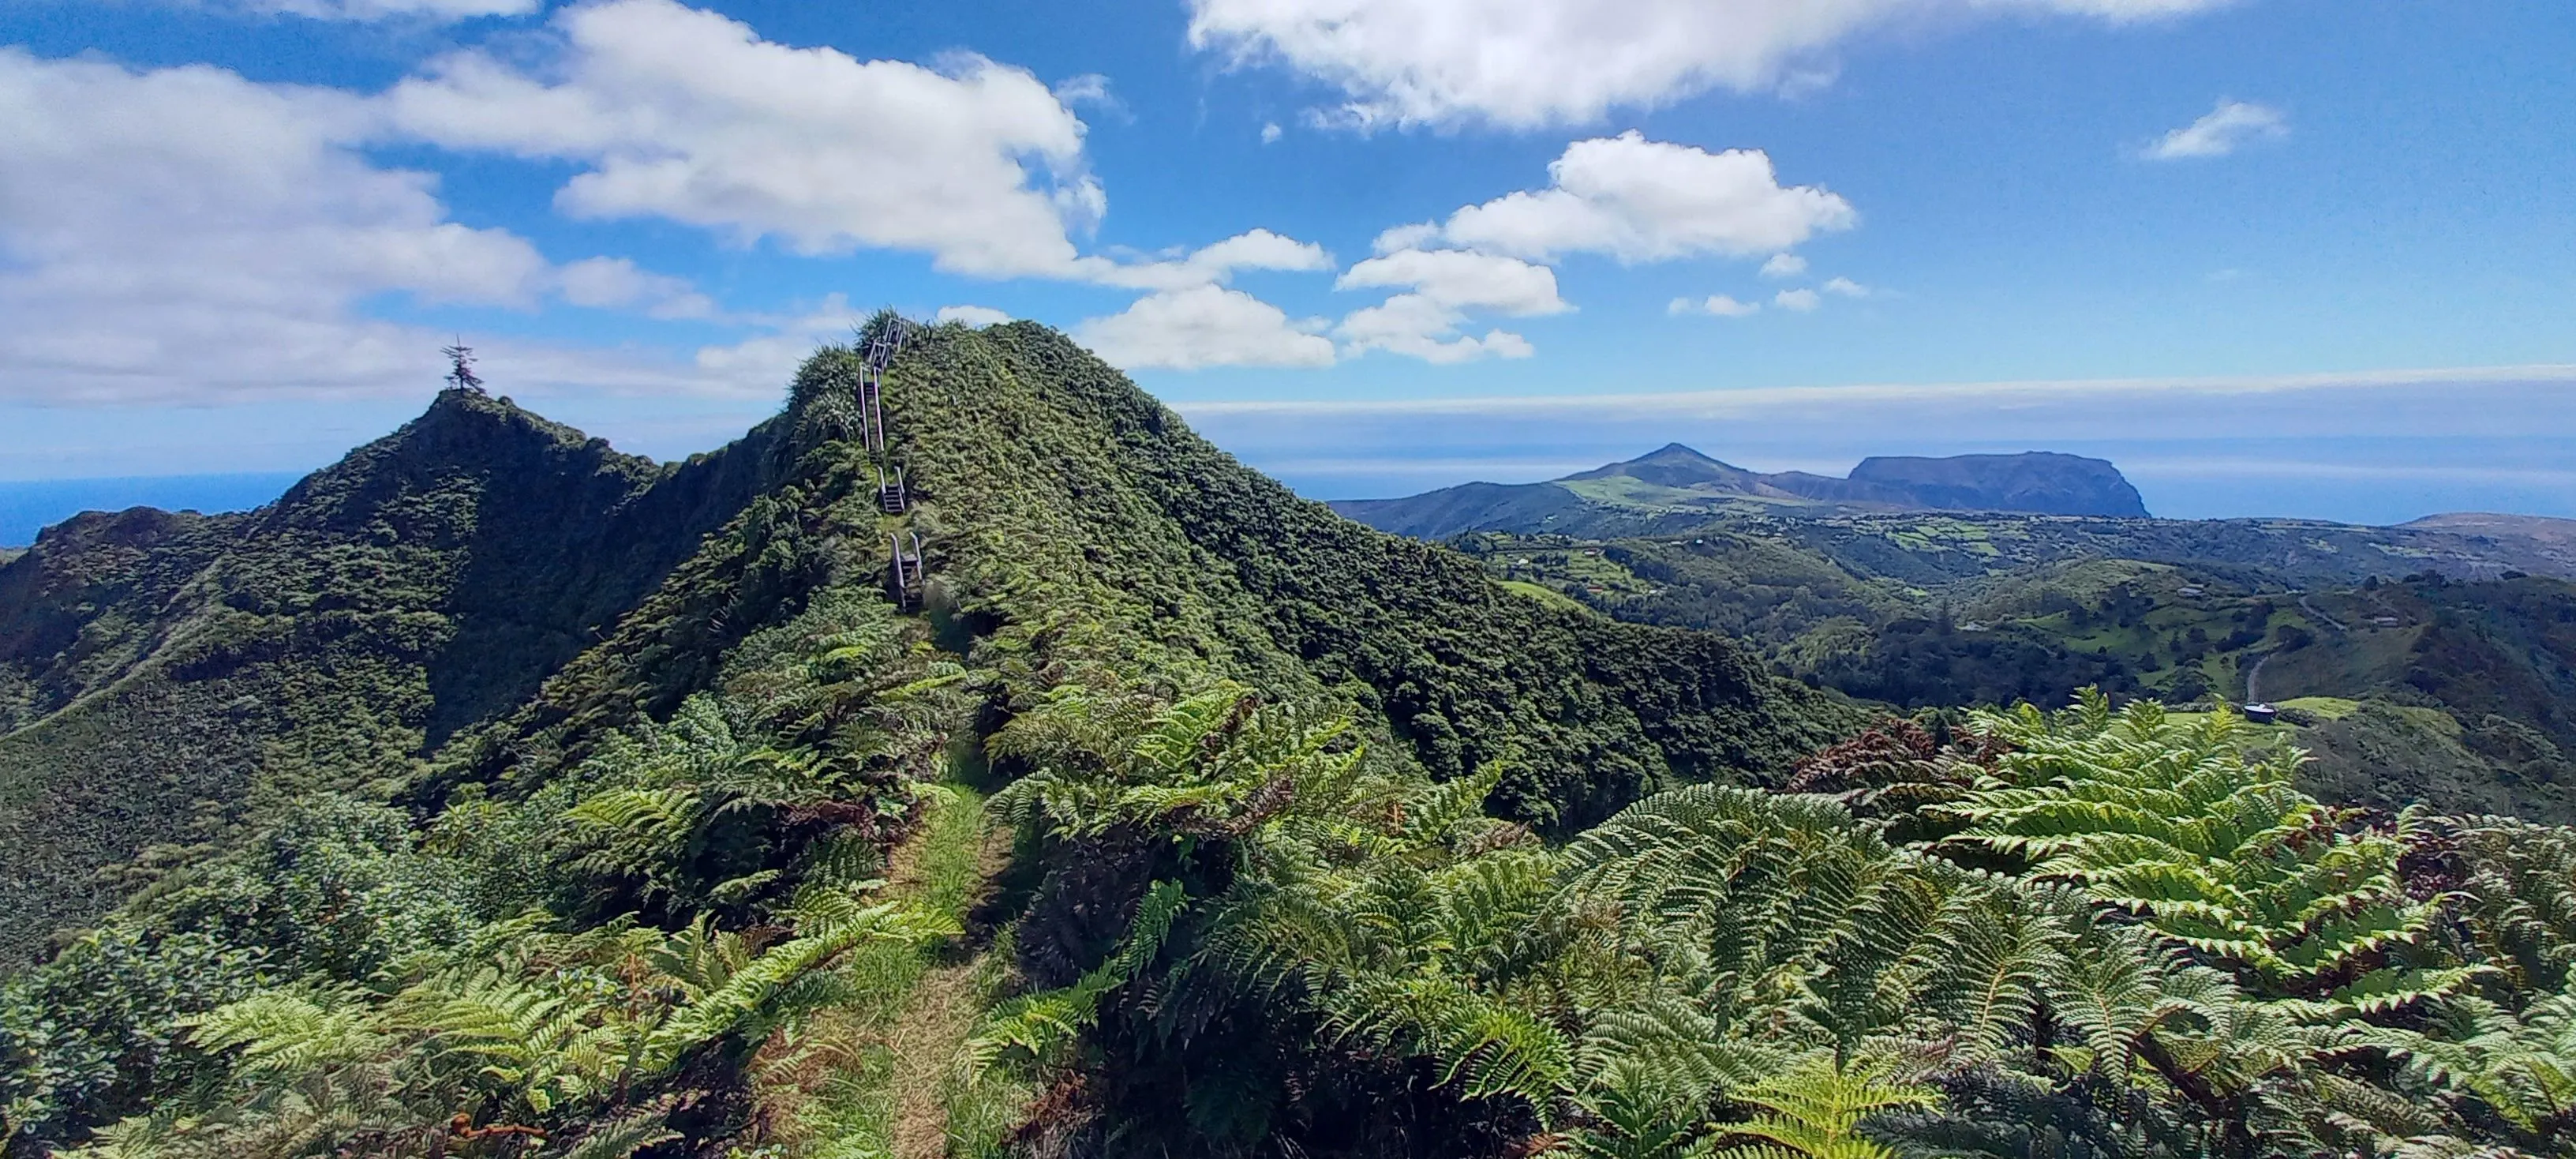 A lush green mountain scape in St Helena Peaks backed by a blue sky and fluffy white clouds.